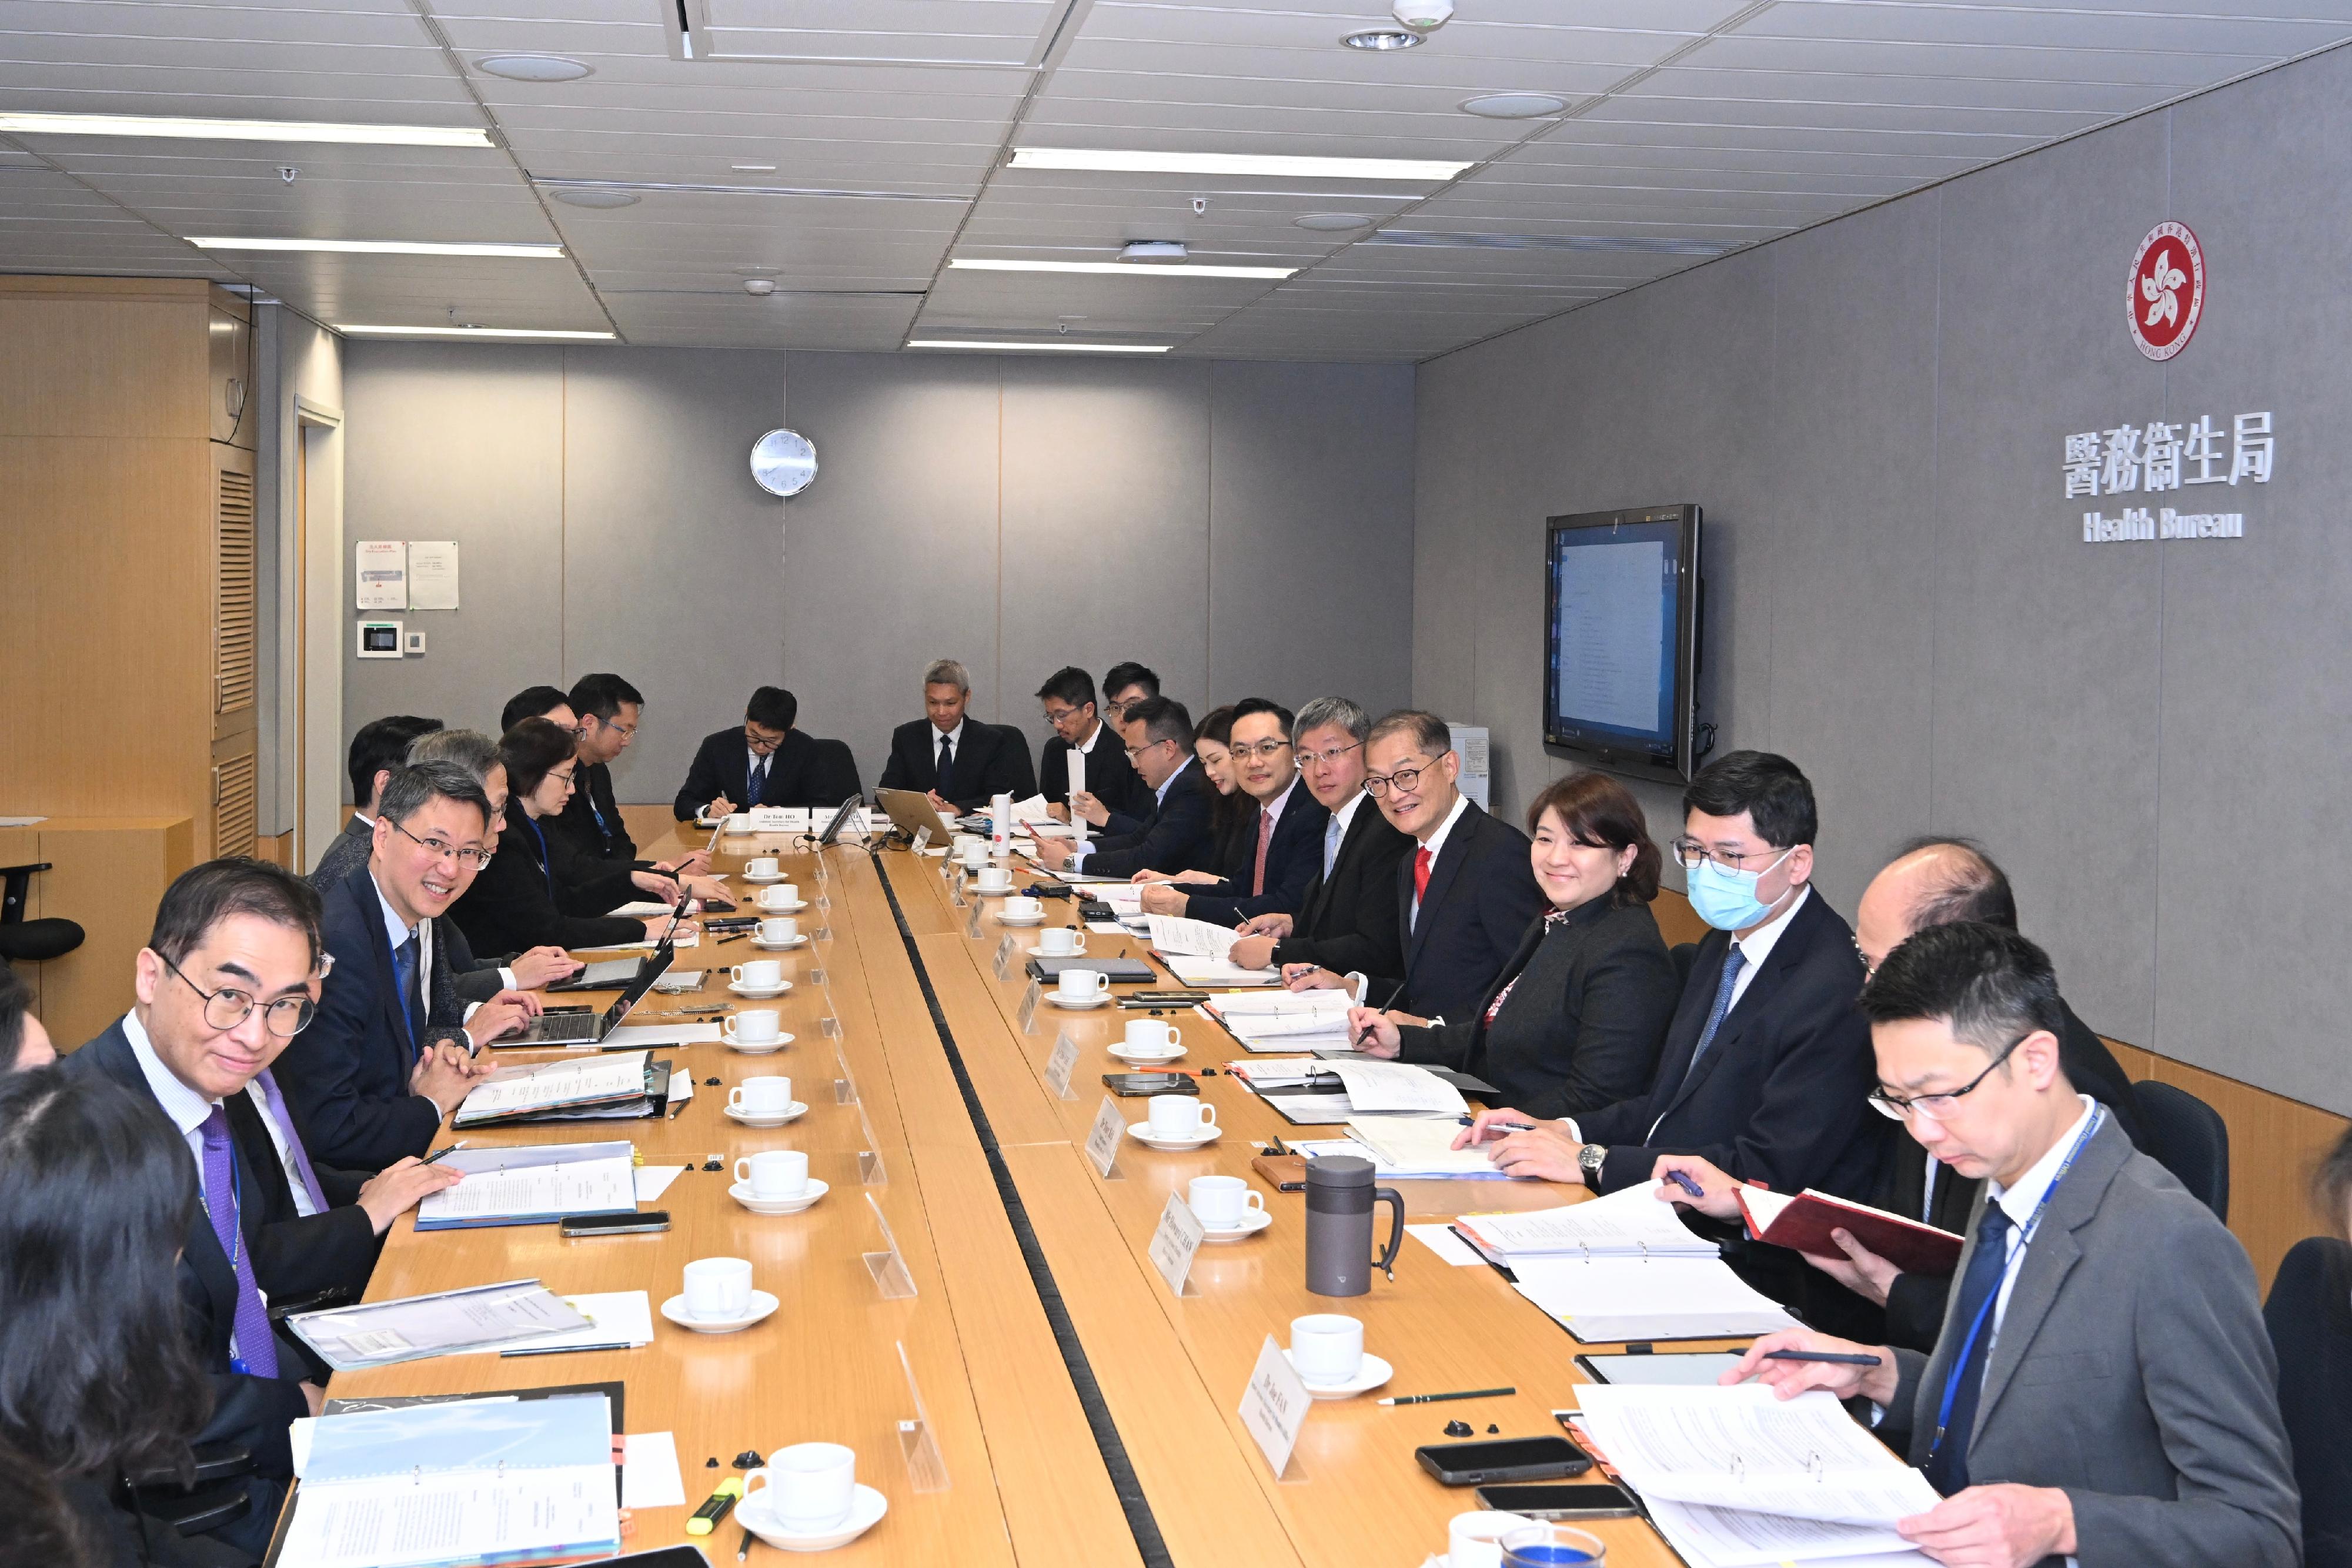 The Secretary for Health, Professor Lo Chung-mau (fifth right), chairs the first meeting of the Steering Committee on Health and Medical Innovation Development today (January 30).